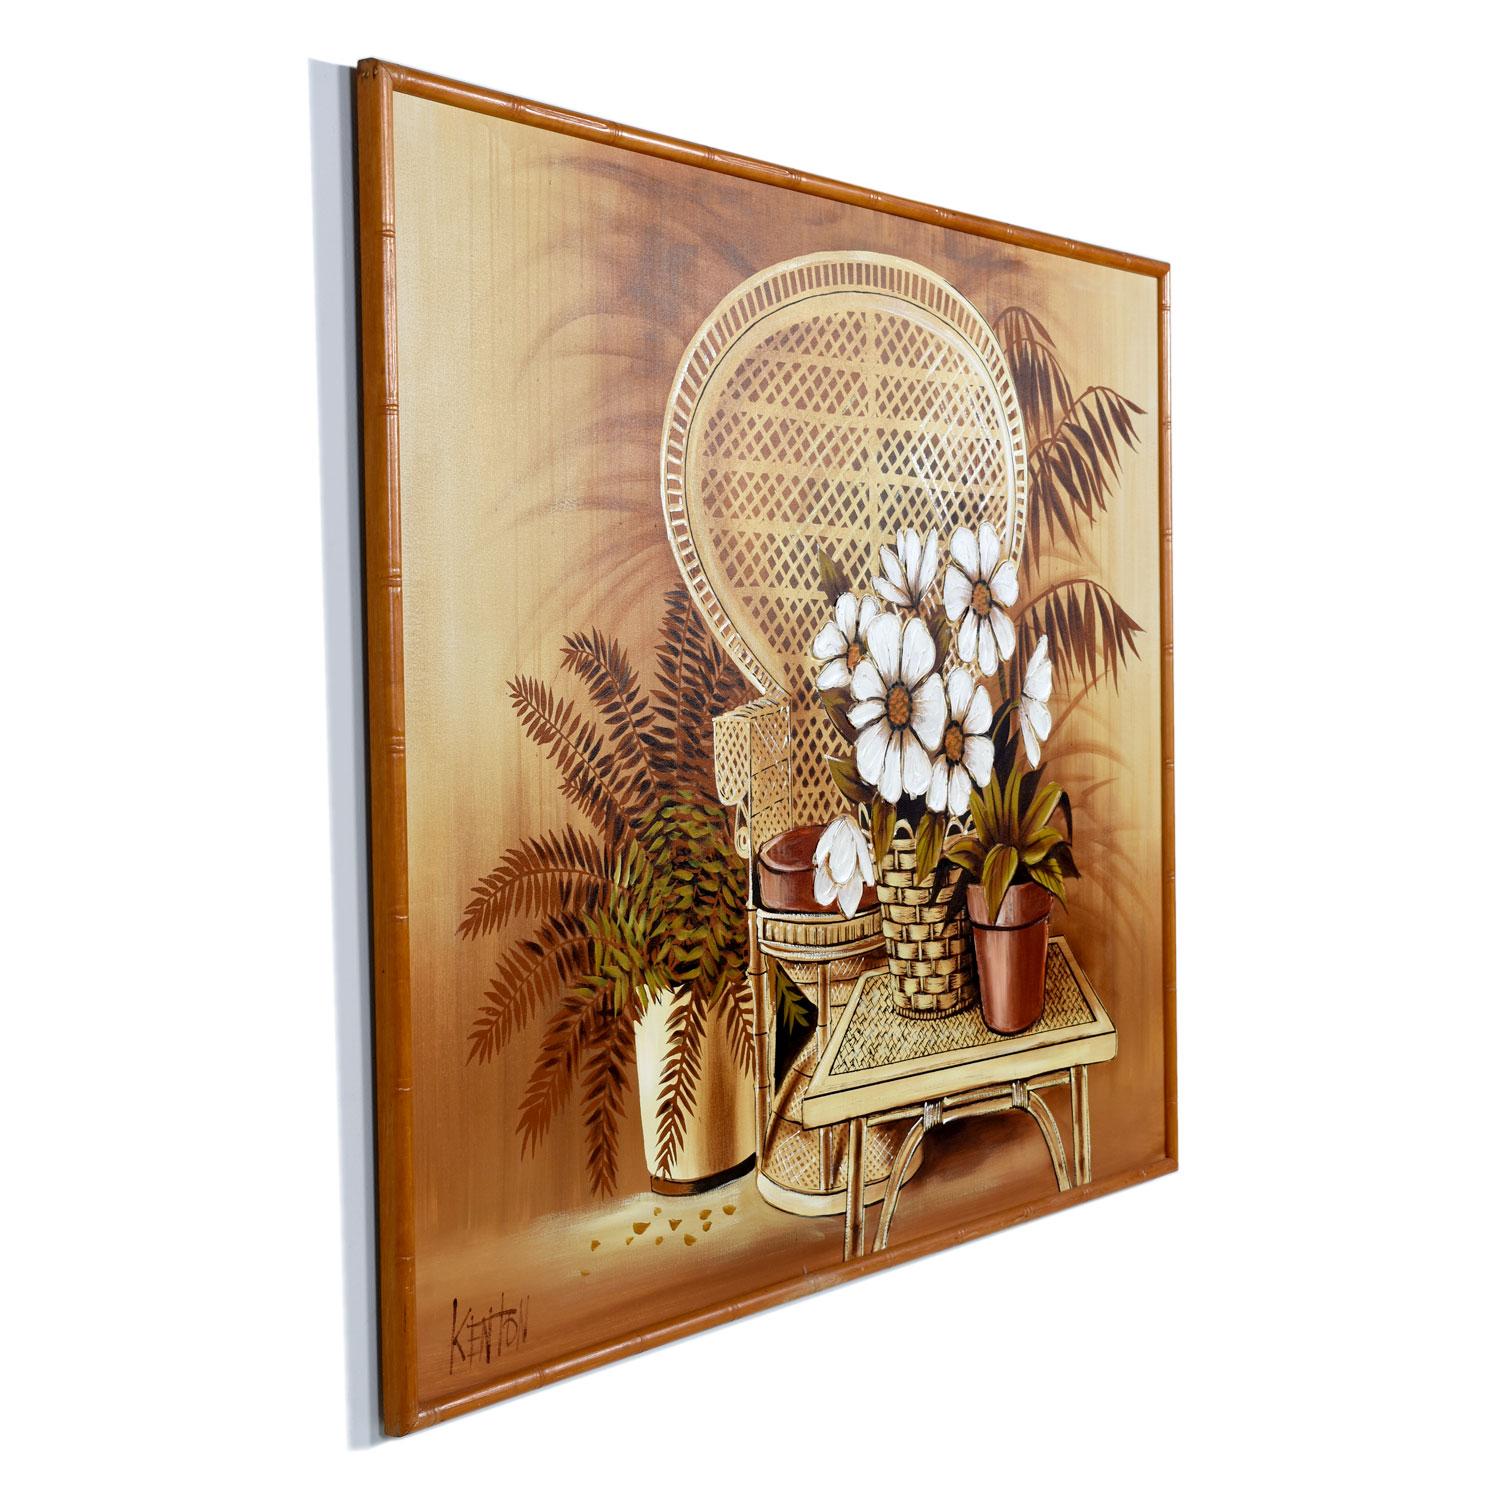 This larger than life oil painting, signed Kenton is steeped in sexy 1970s allure. The wicker peacock chair, which is practically a mascot of 1970s counter culture, stands at center. Balancing the commanding chair is a wicker table abound with white